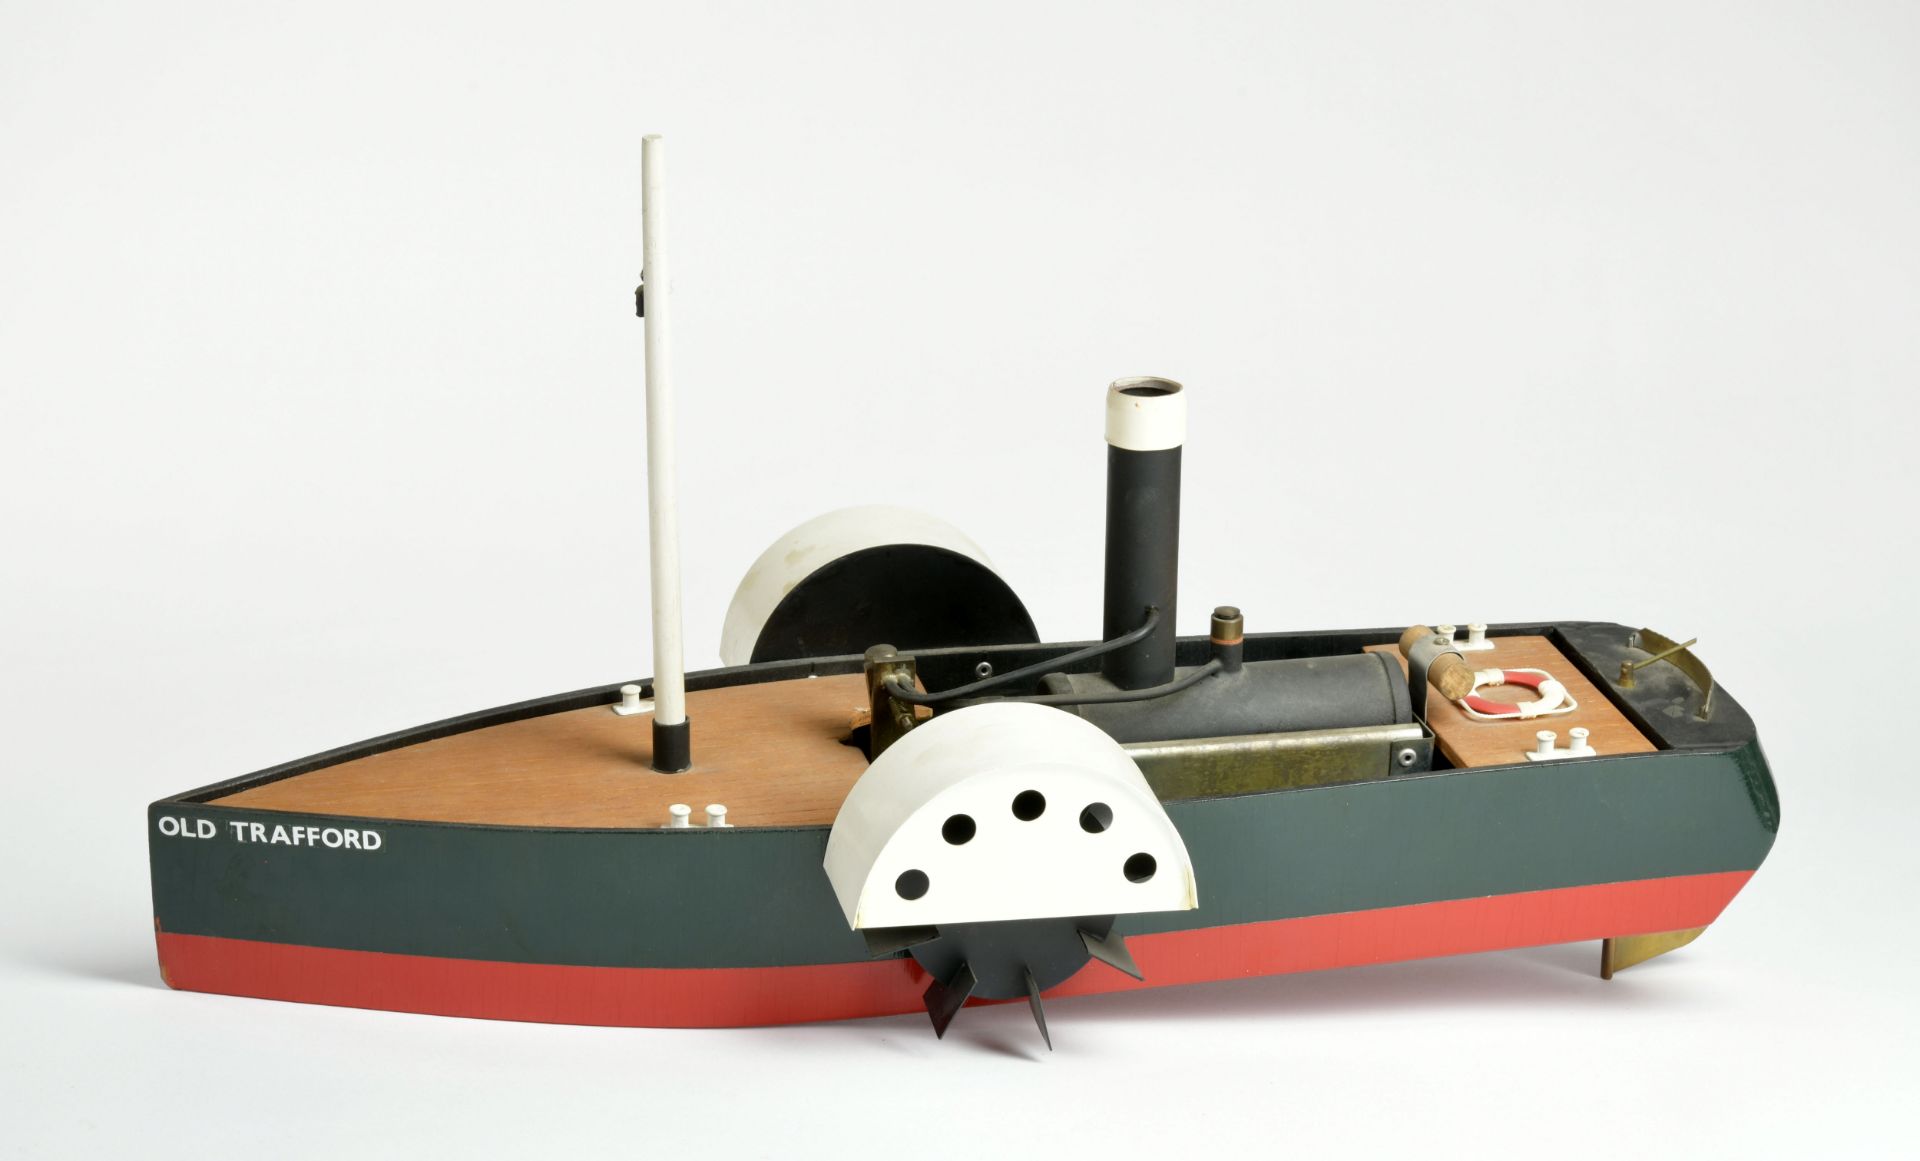 Wooden ship "Old Trafford", England, 50cm, mit steam drive, min. dusty otherwise C 1